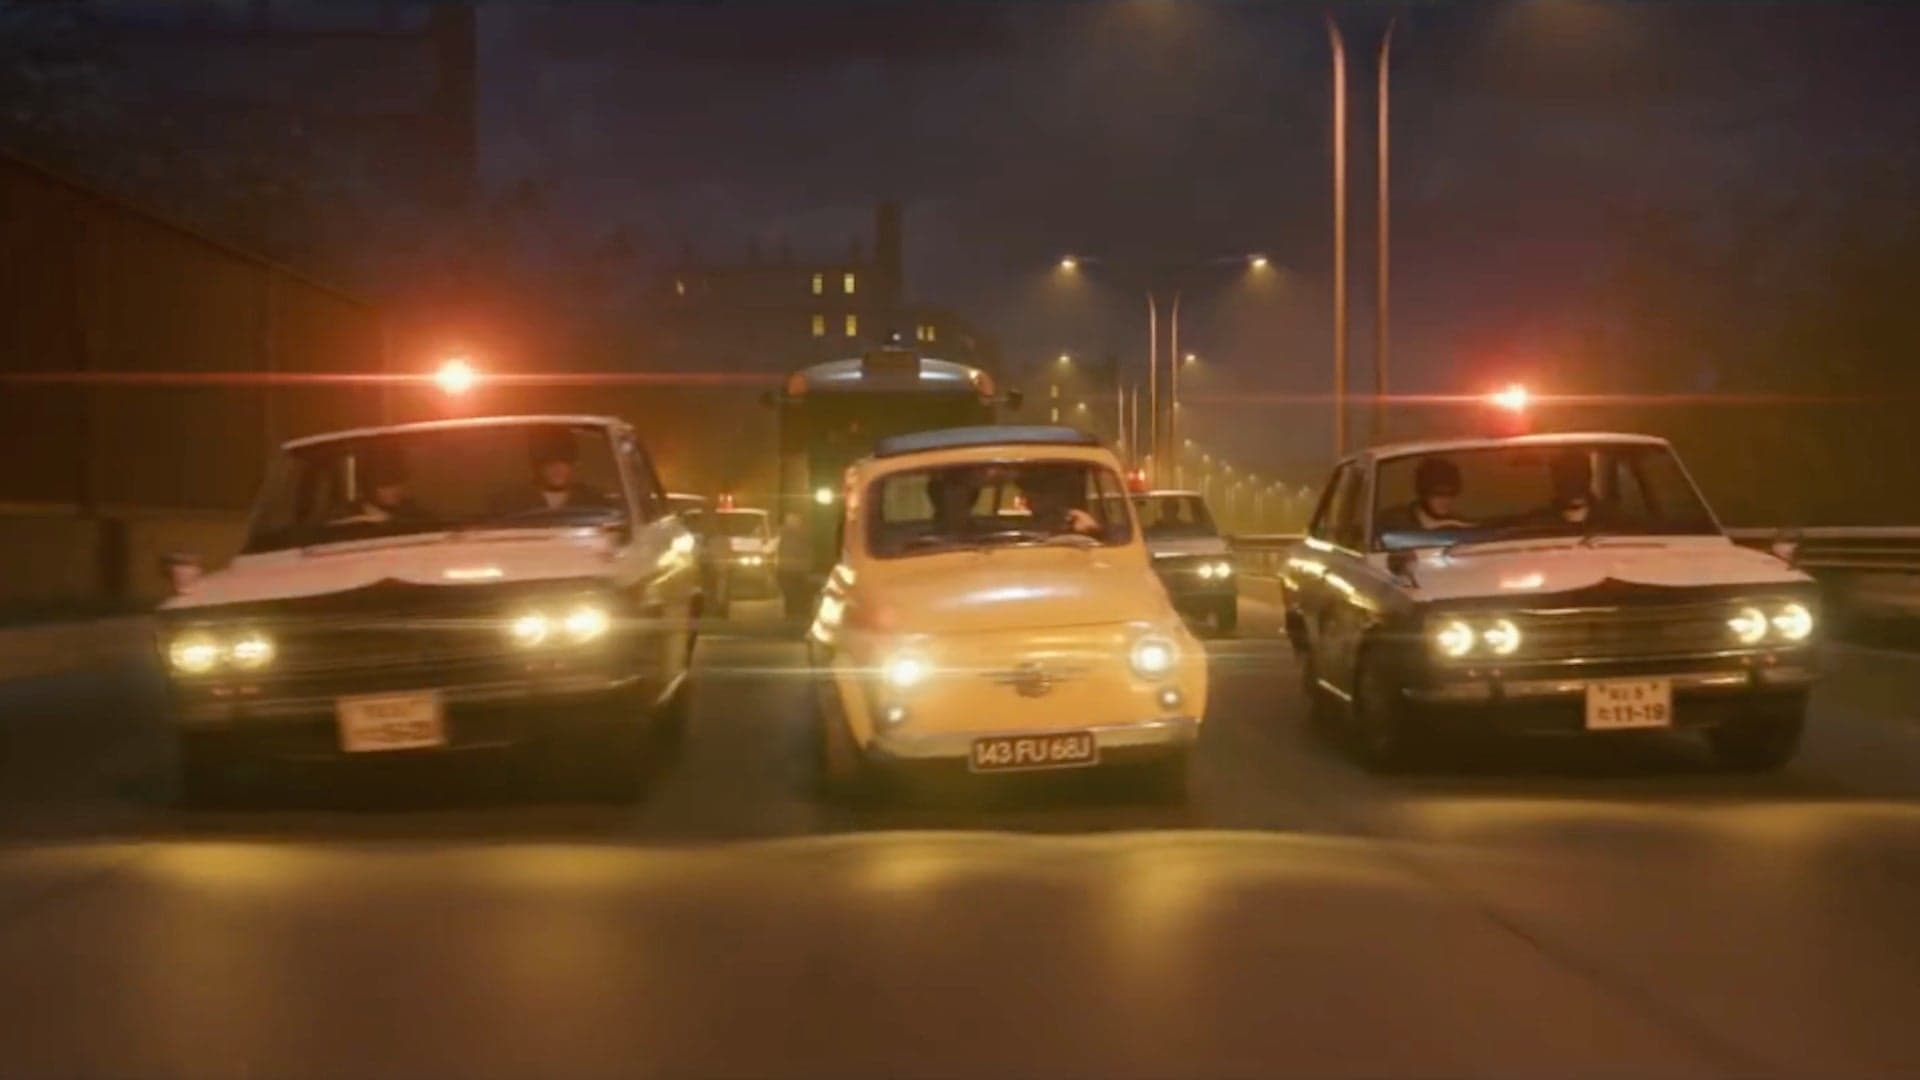 New Lupin III Trailer Promises Outrageous Vintage Car Chases